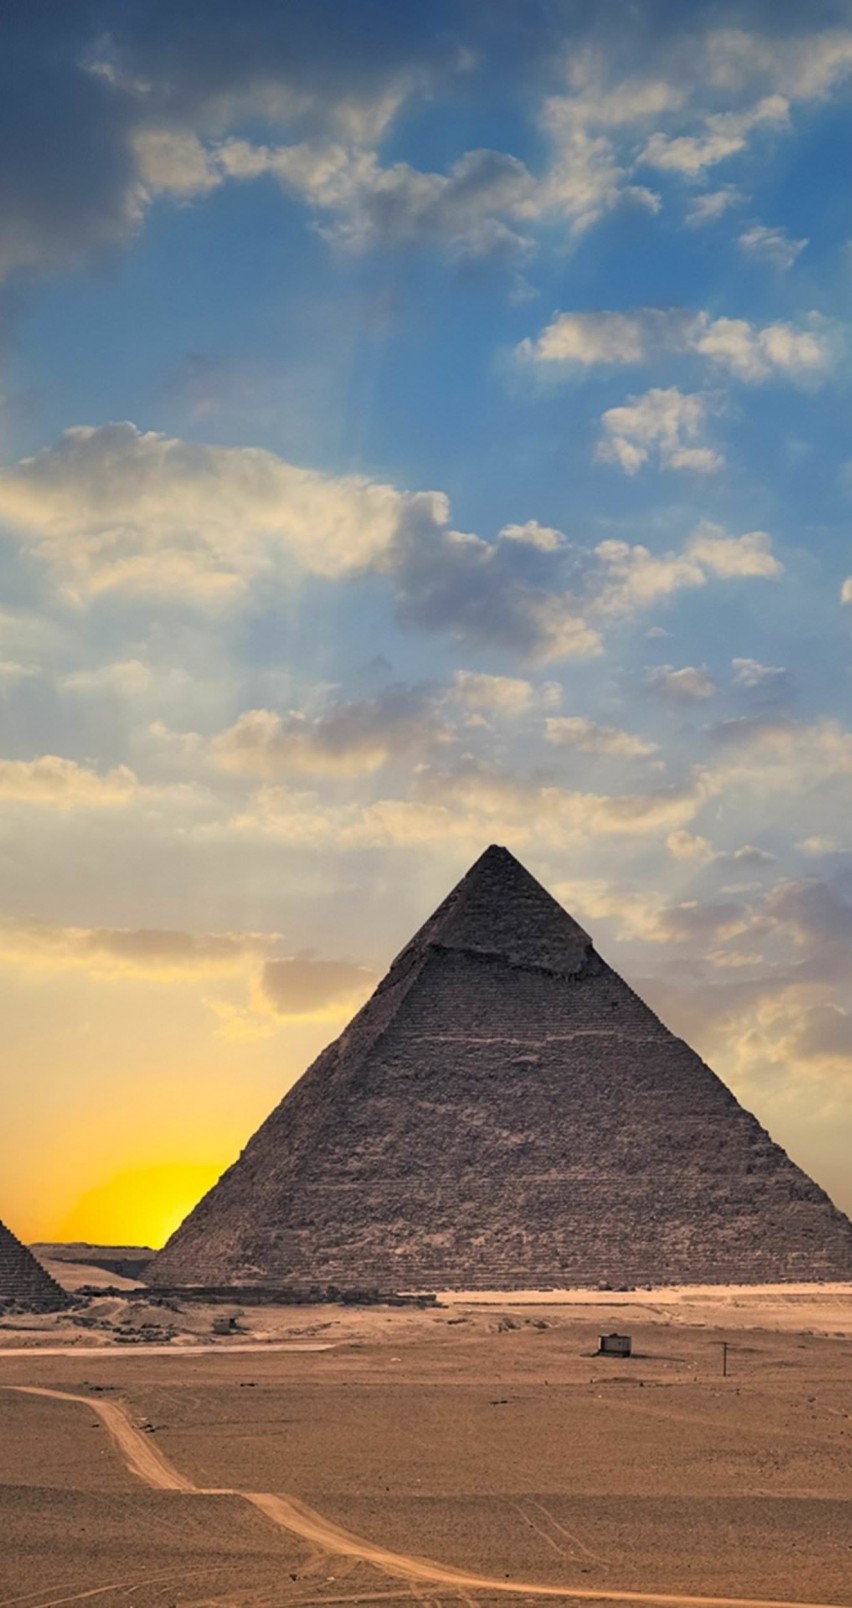 The Great Pyramids of Giza Wallpaper for Apple iPhone 6 / 6s